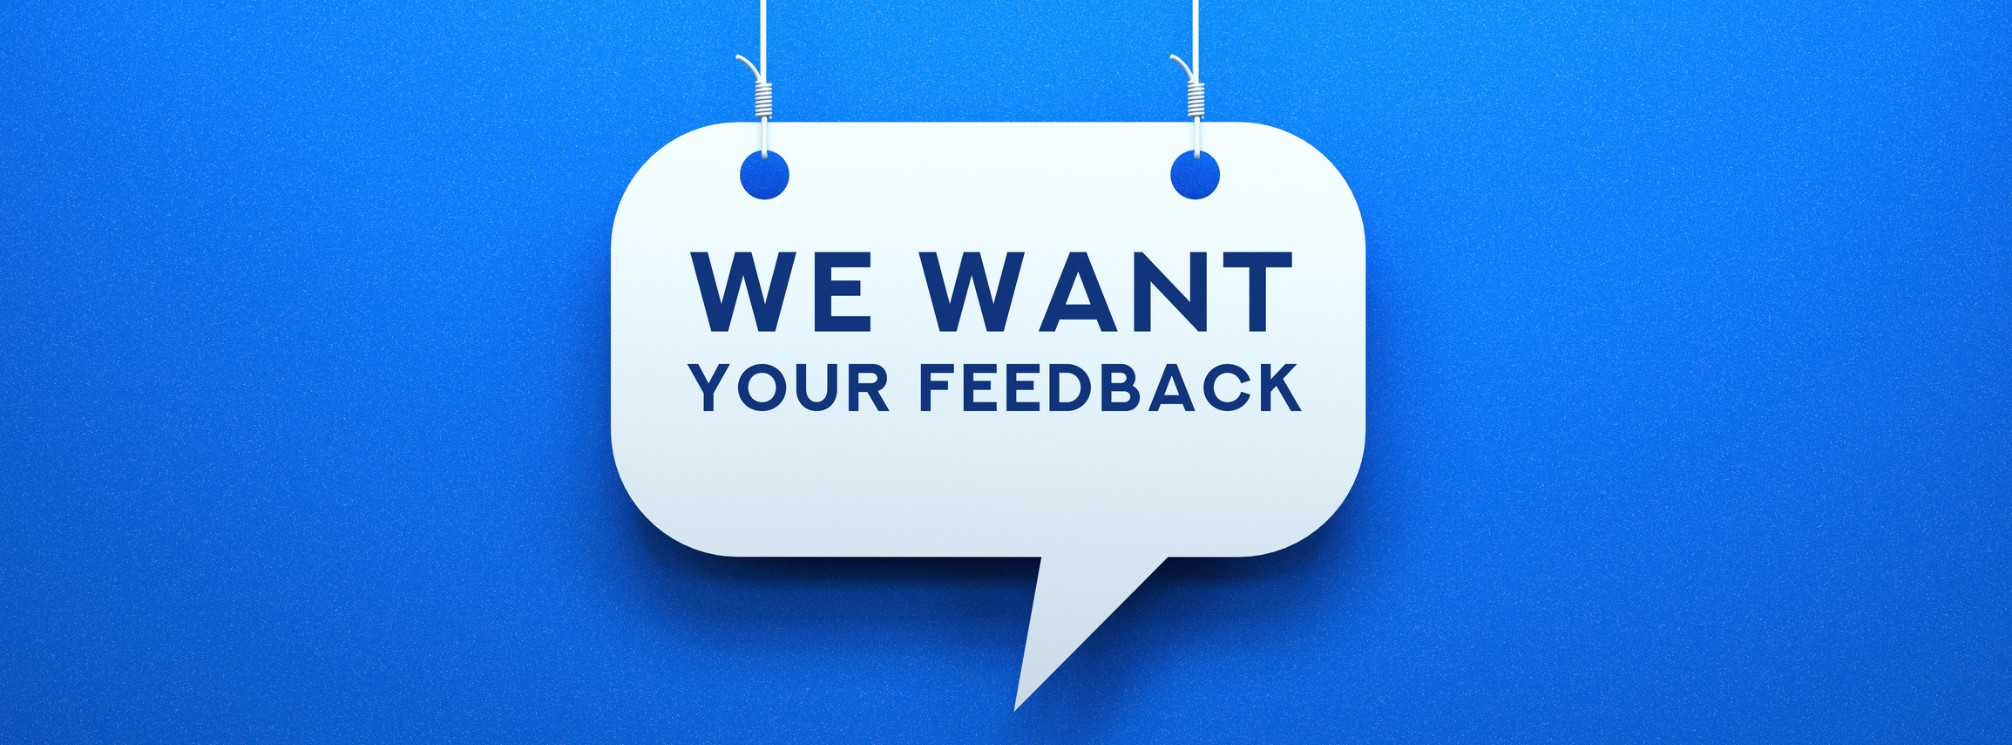 graphic with a speech bubble that says "we want your feedback"